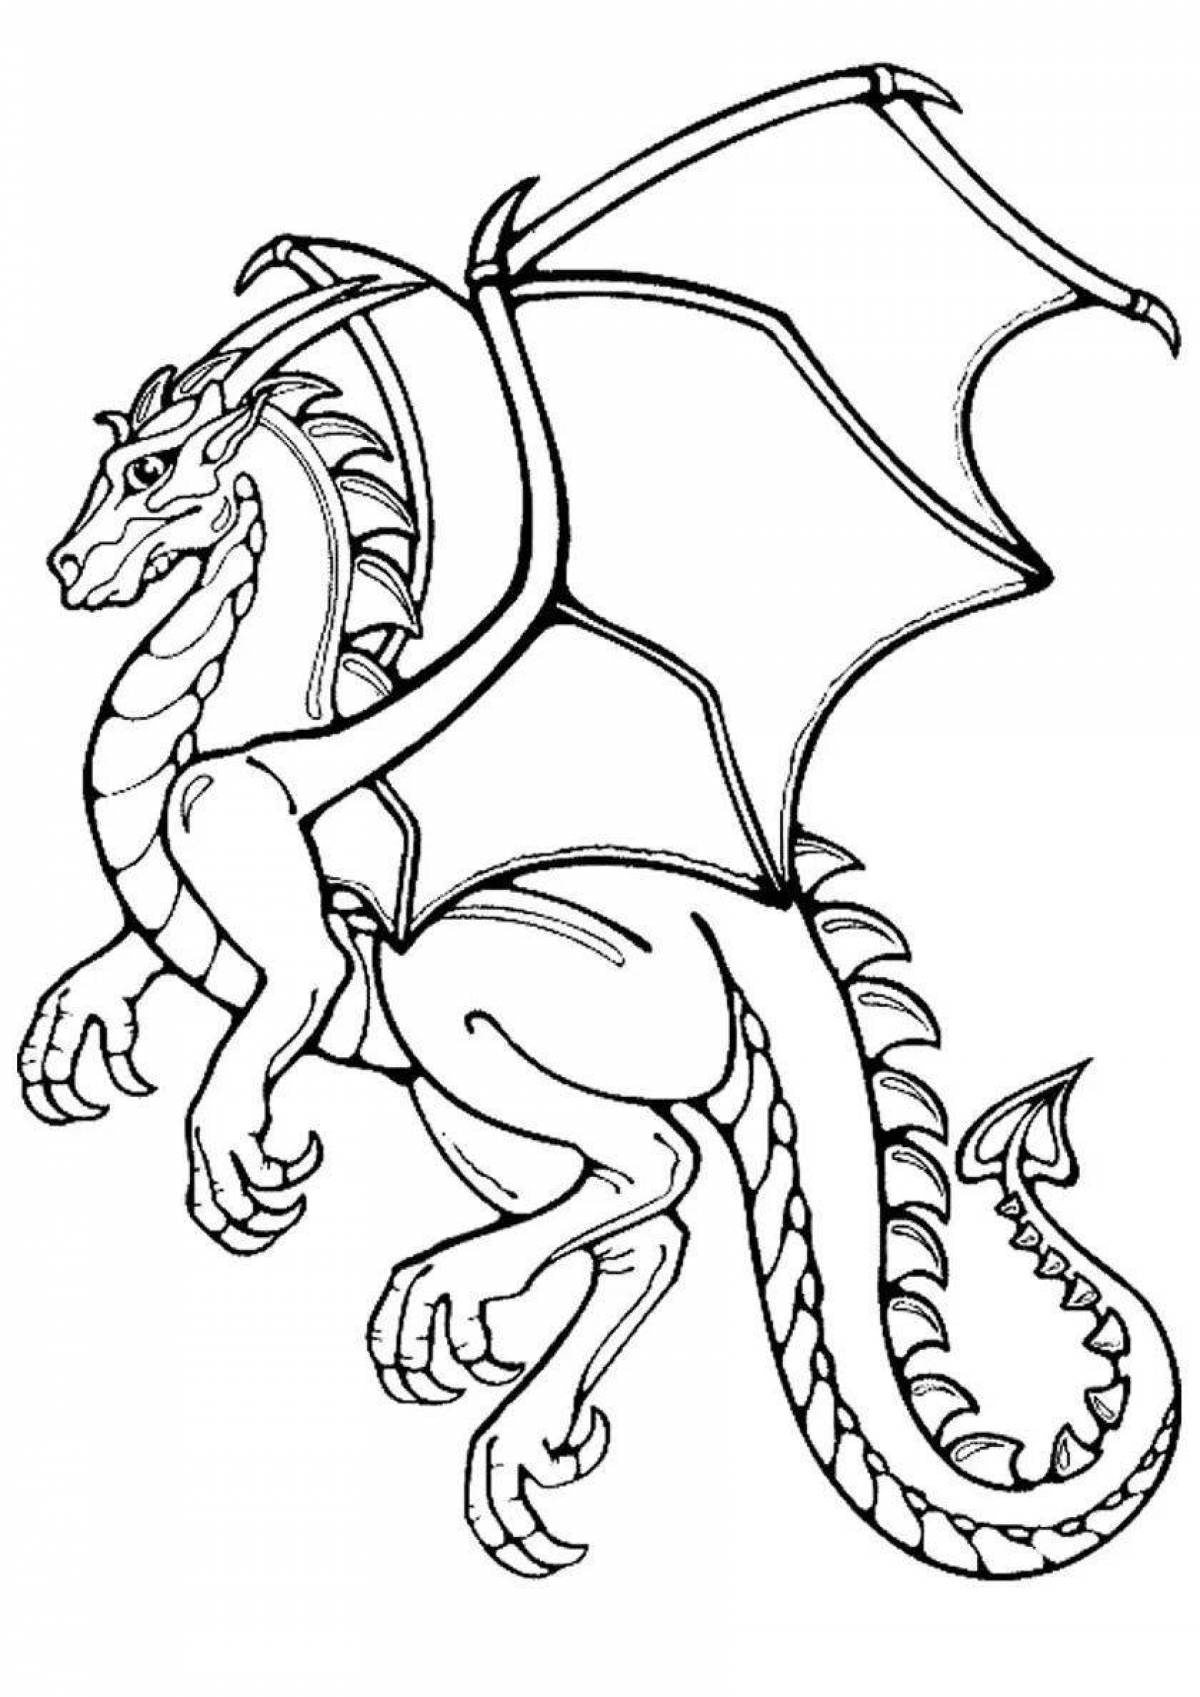 Amazing dragon coloring pages for 4-5 year olds